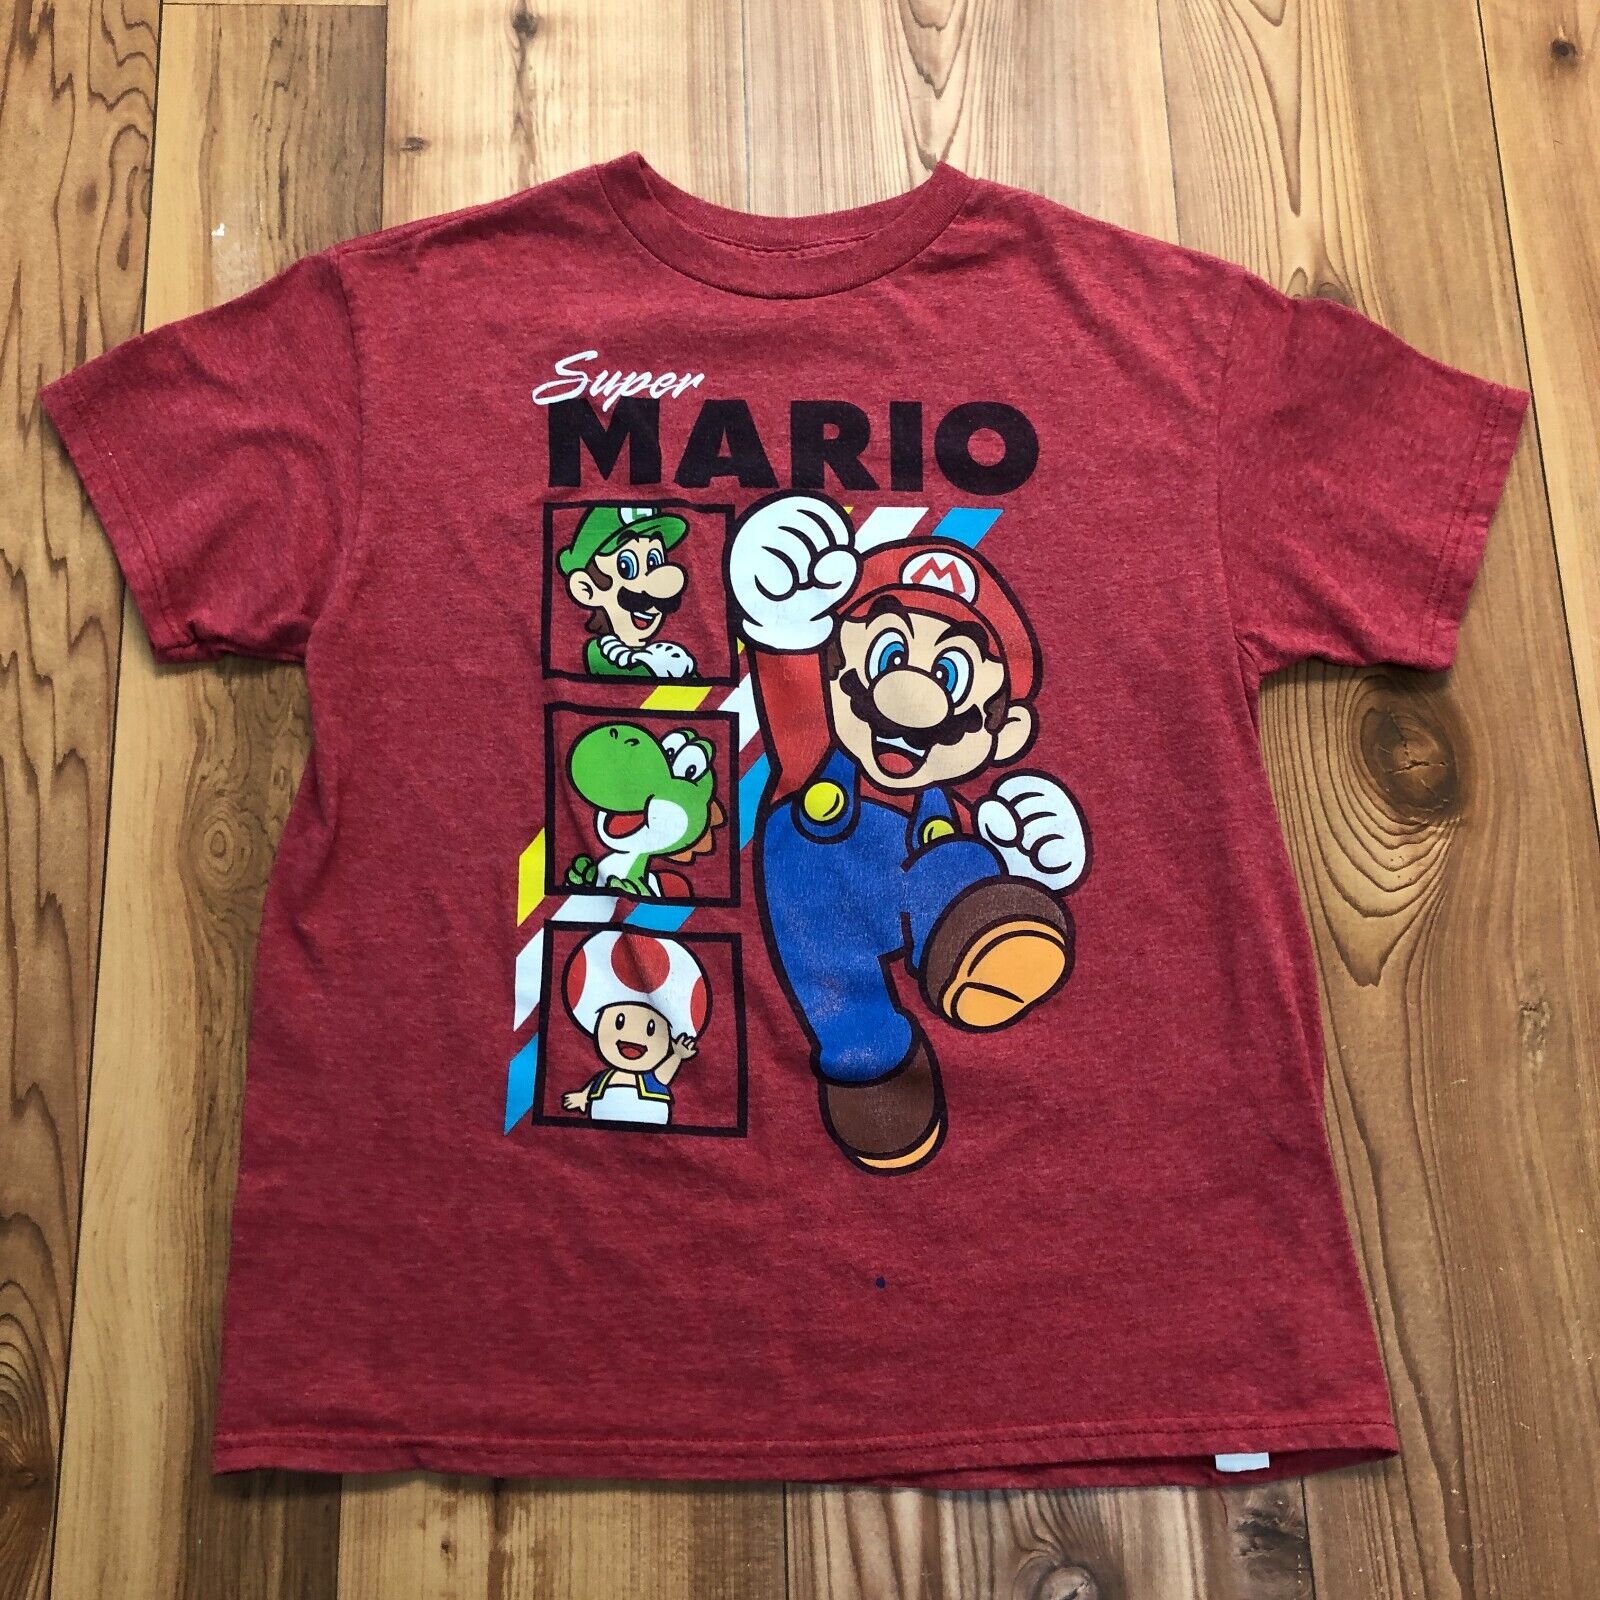 Super Mario Red Mario Carts Cotton Short Sleeve T-Shirt Youth Size S